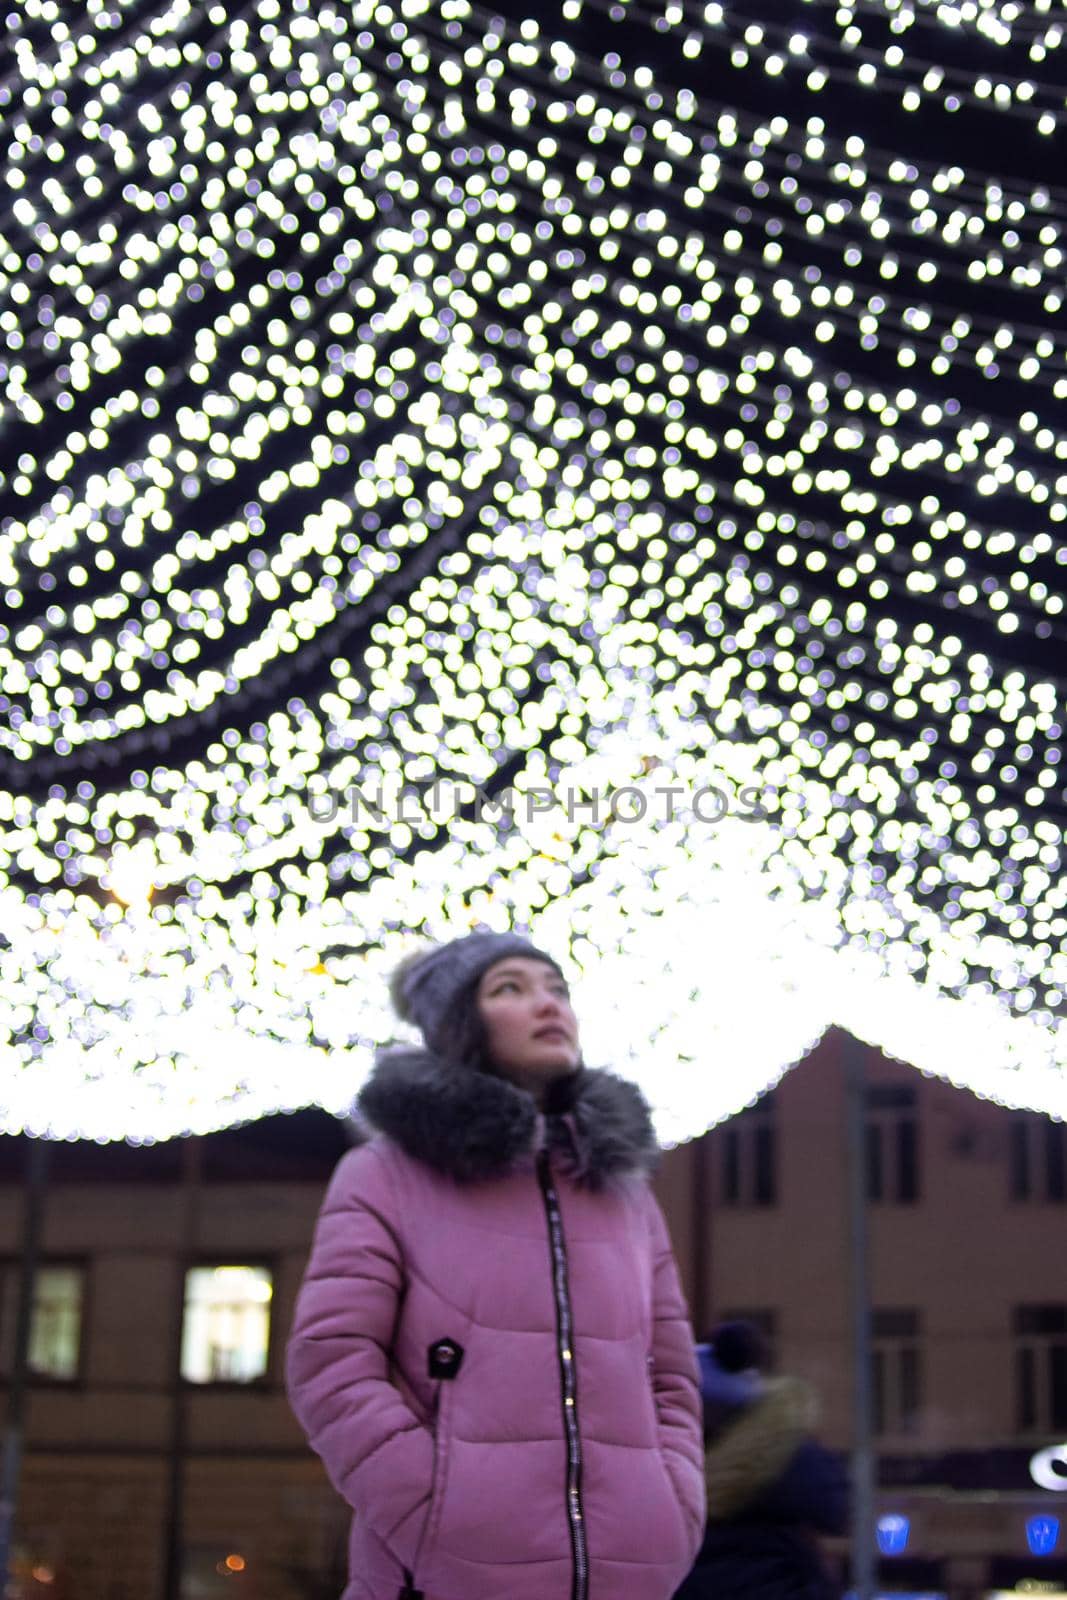 Young woman looks up, central downtown with christmas lights at night, sky festive illumination shine and glow, urban holiday, vertical defocus image with copy space, low angle